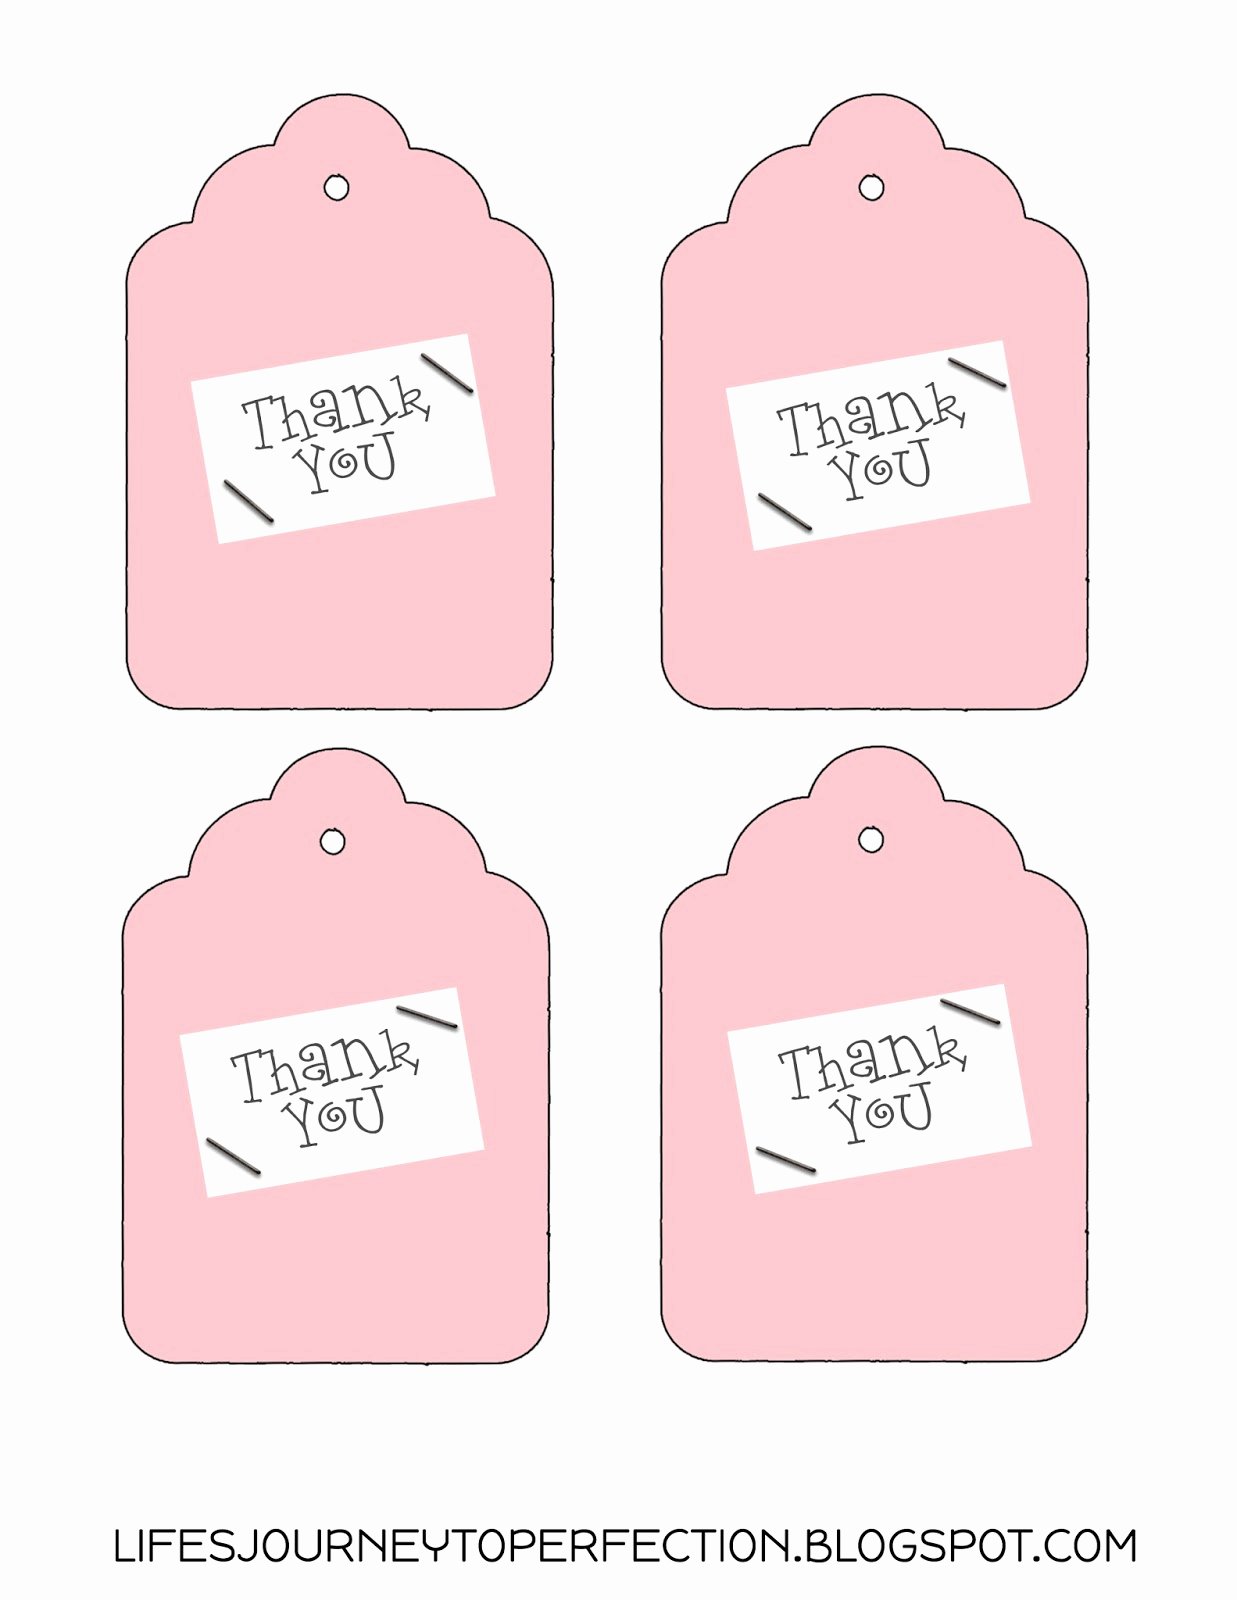 Free Printable Thank You Tags Elegant Life S Journey to Perfection Thank You Gift Idea and Free